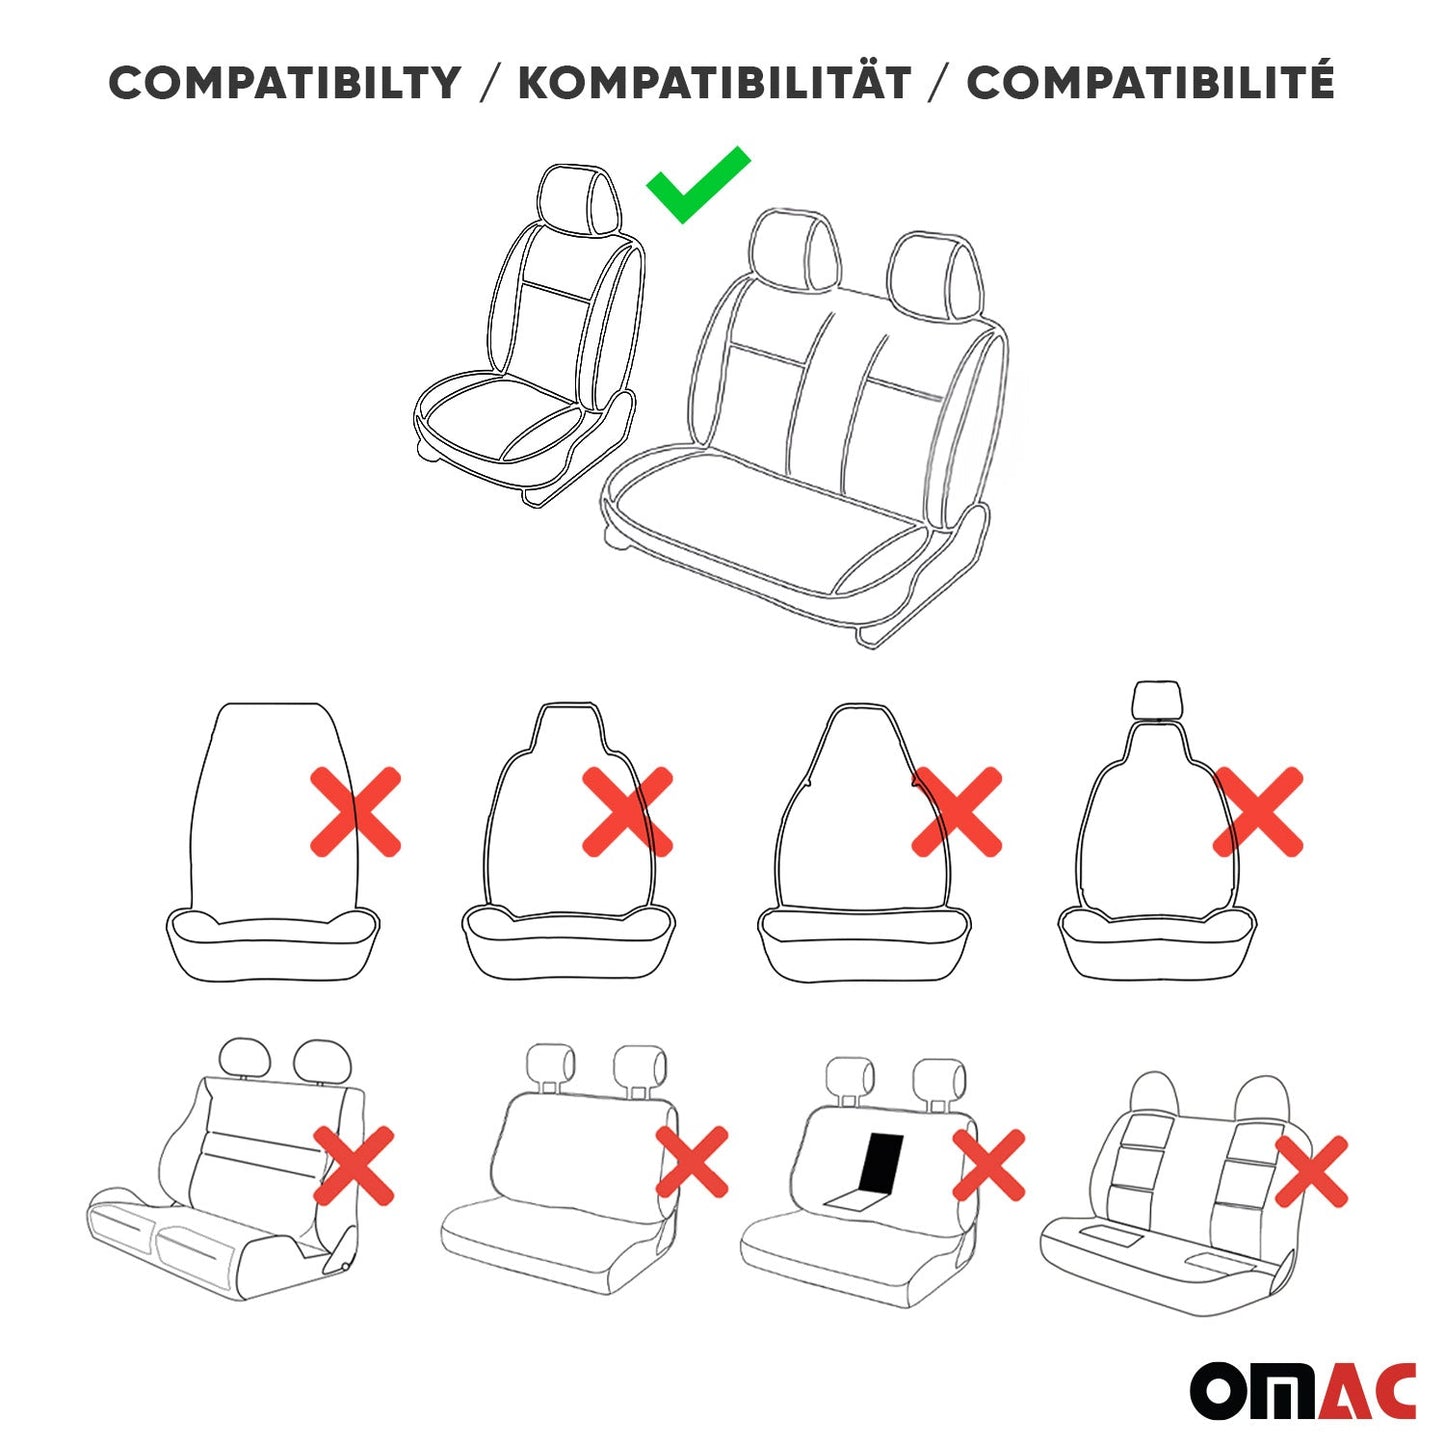 OMAC Front Car Seat Covers Protector for RAM Promaster 2014-2024 Black Red 2+1 Set A013009